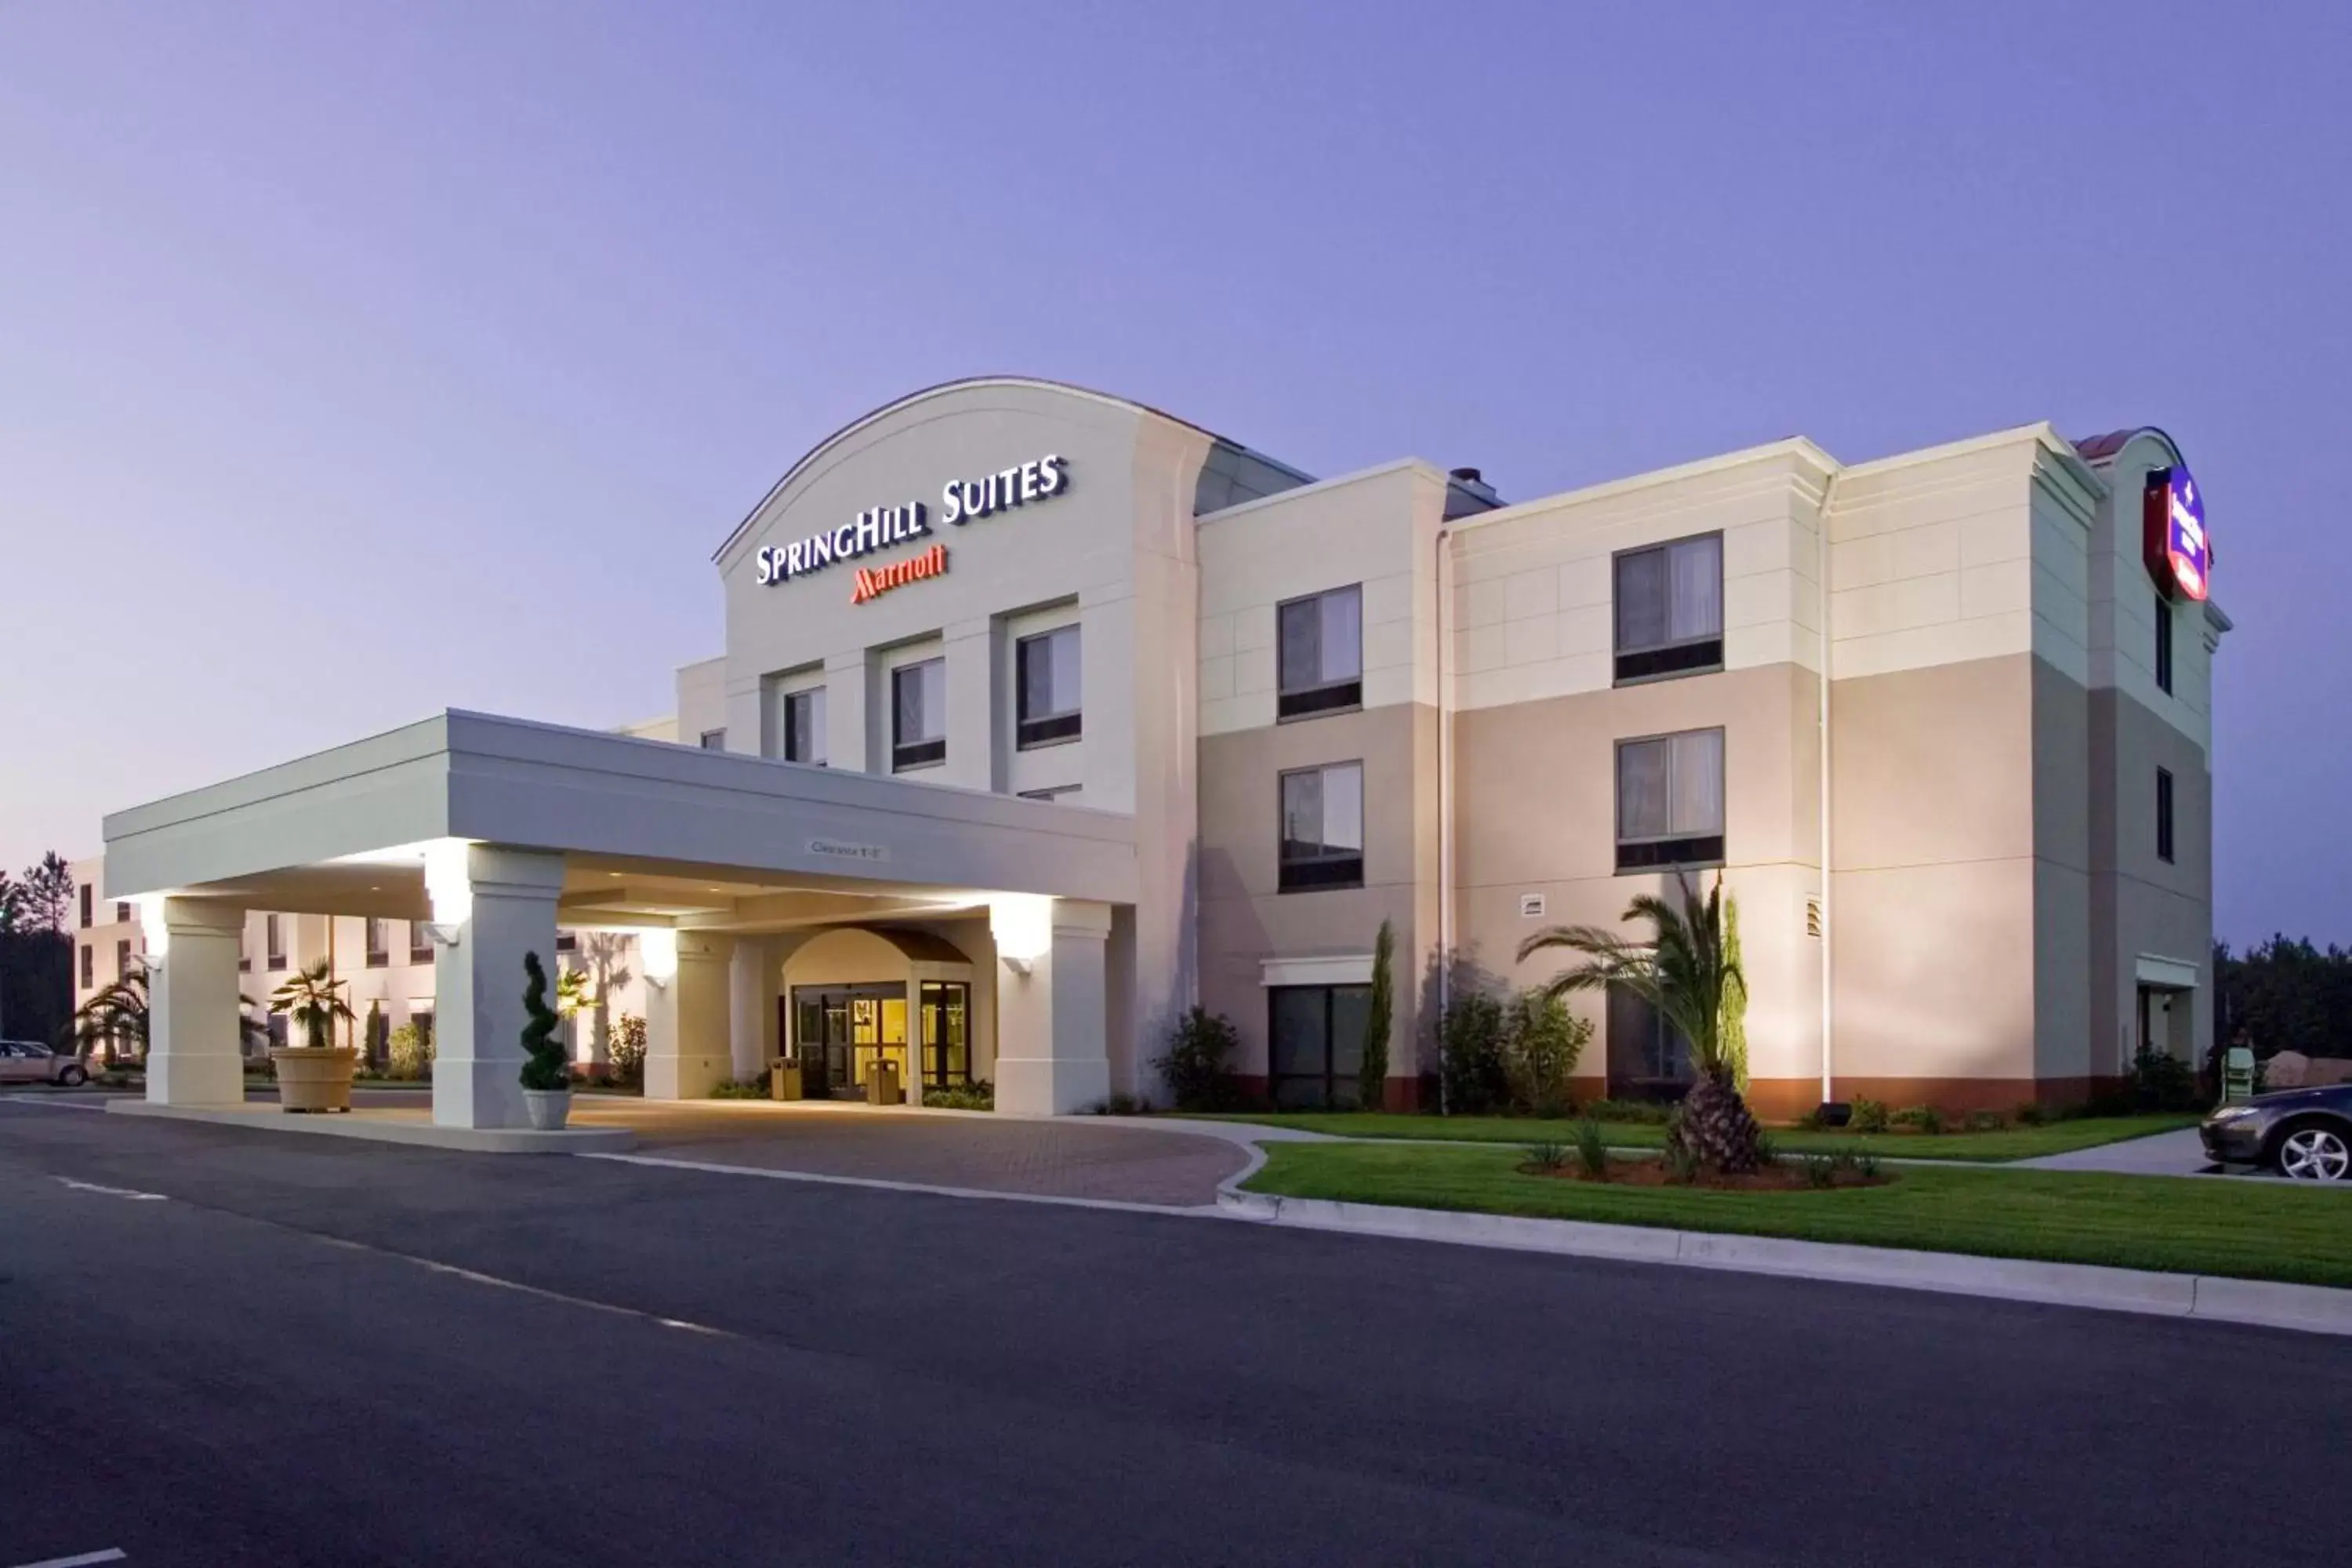 Property Building in SpringHill Suites Savannah Airport